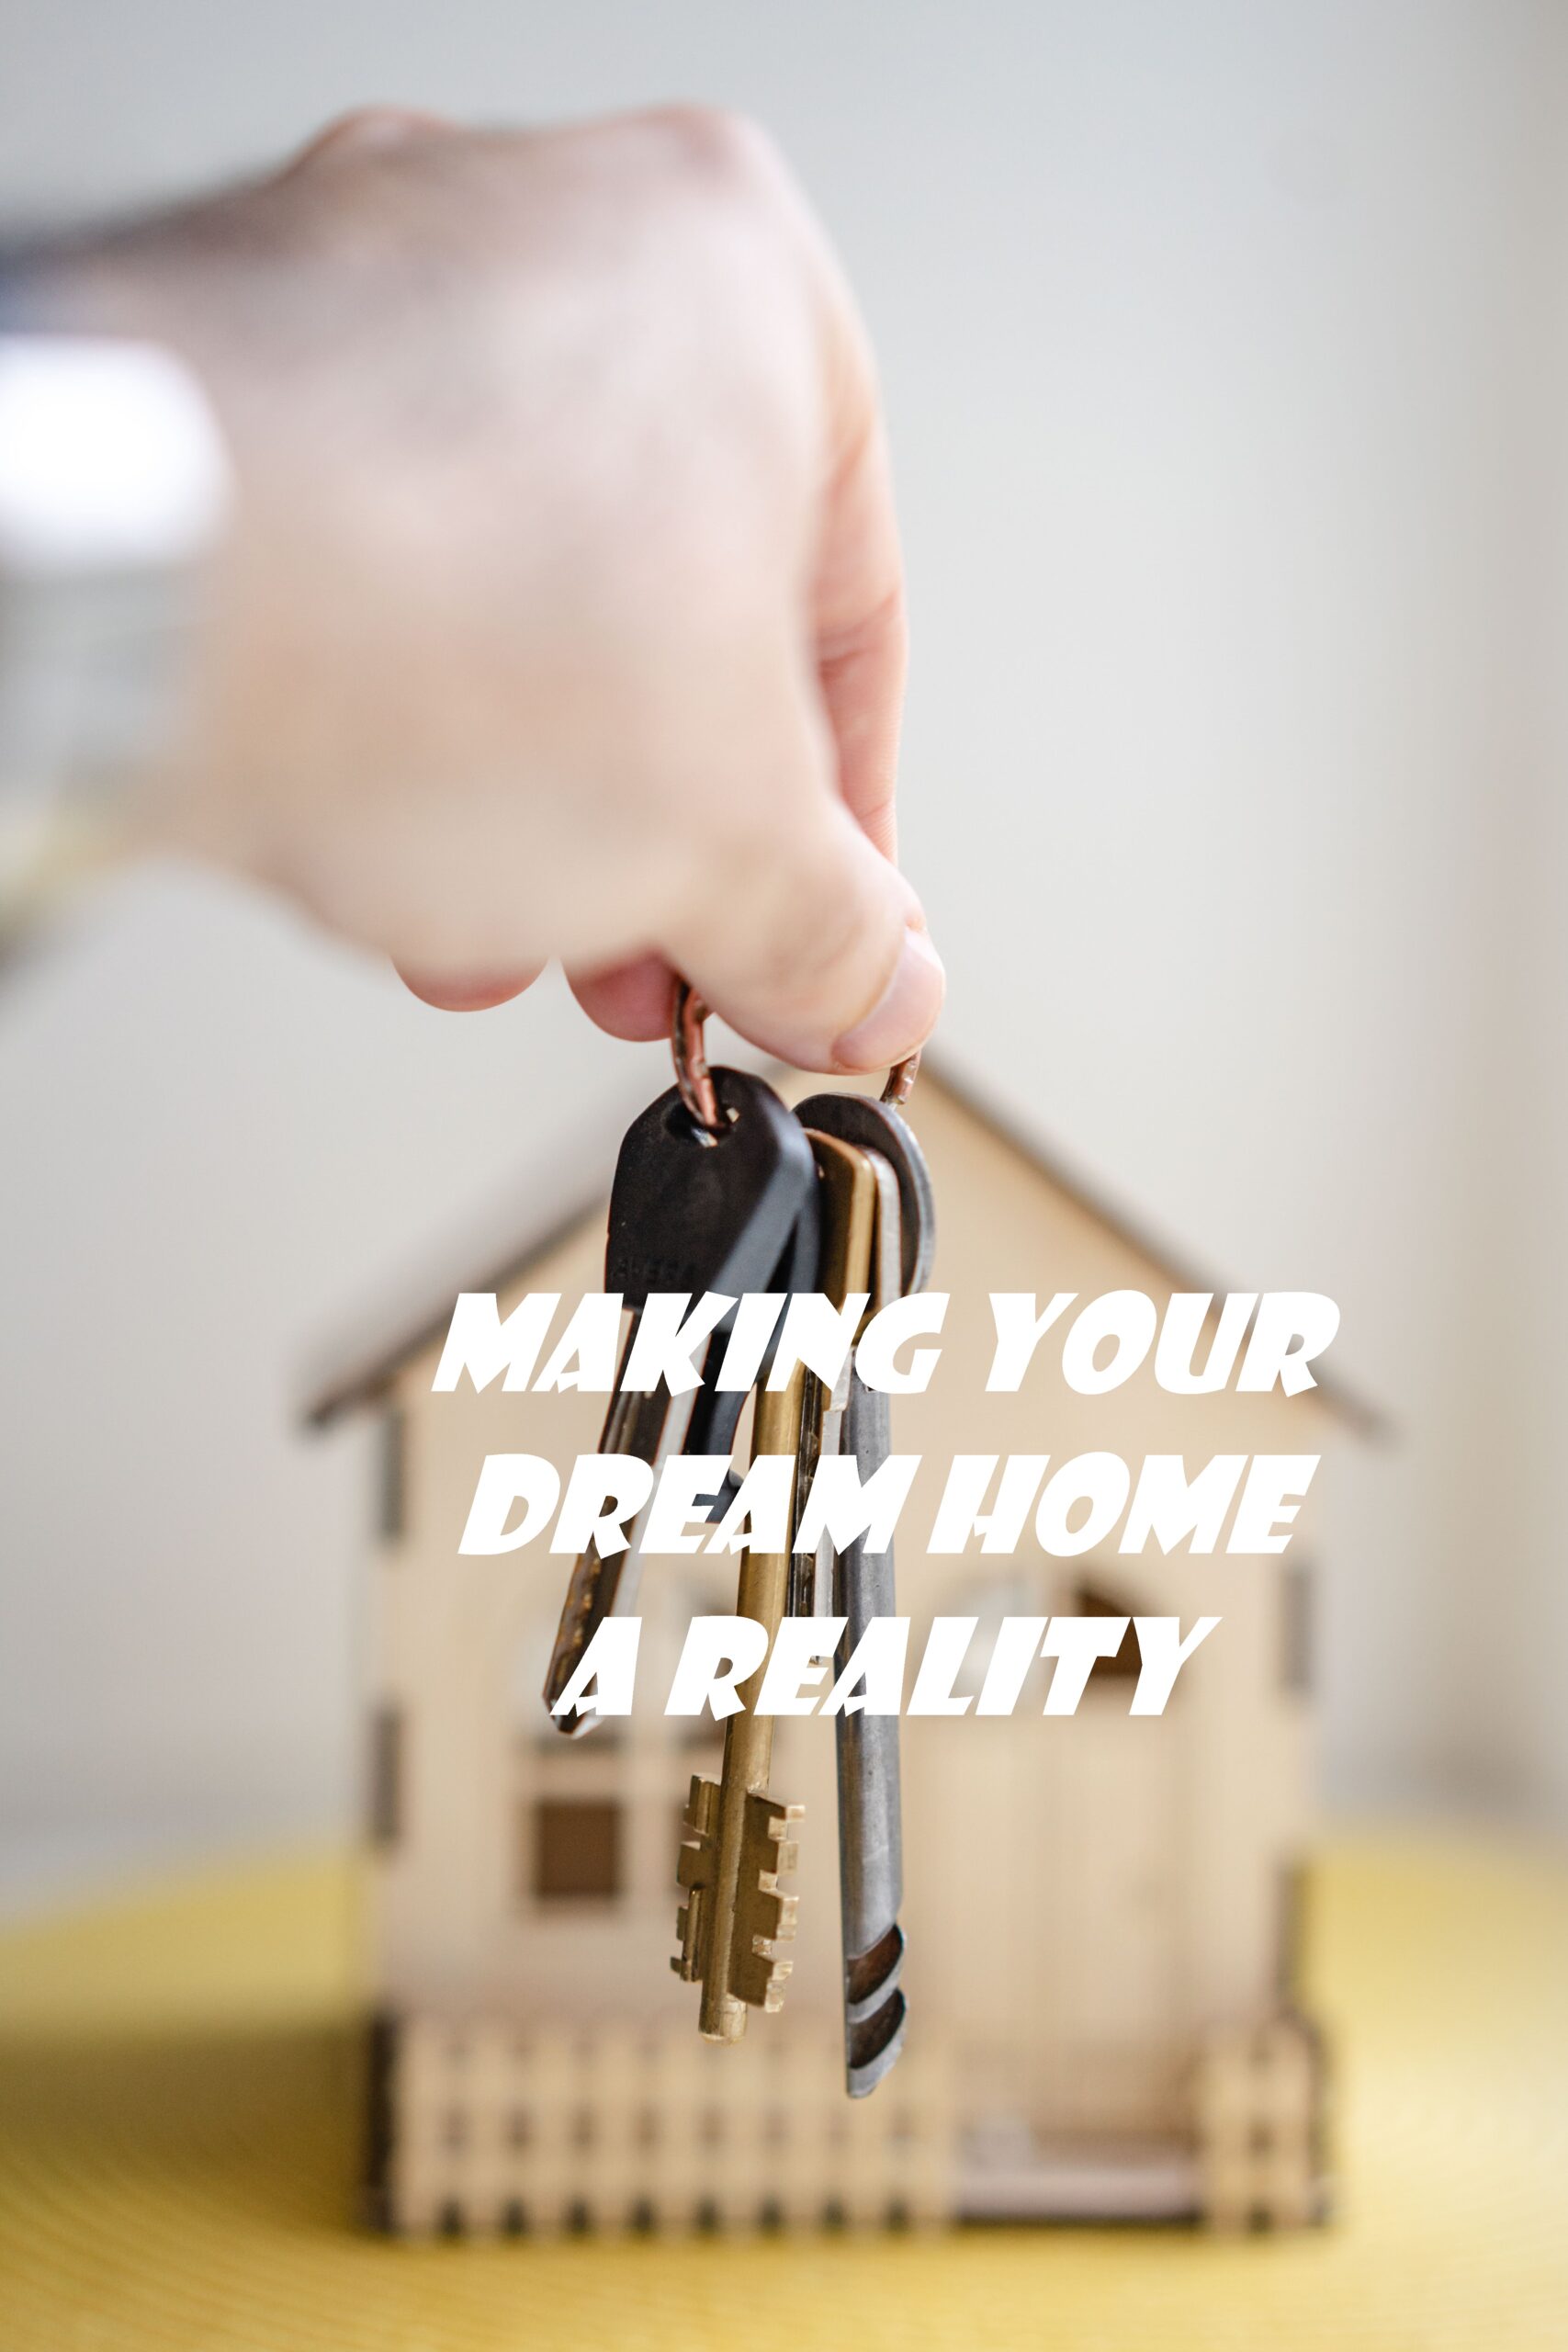 Making Your Dream Home a Reality